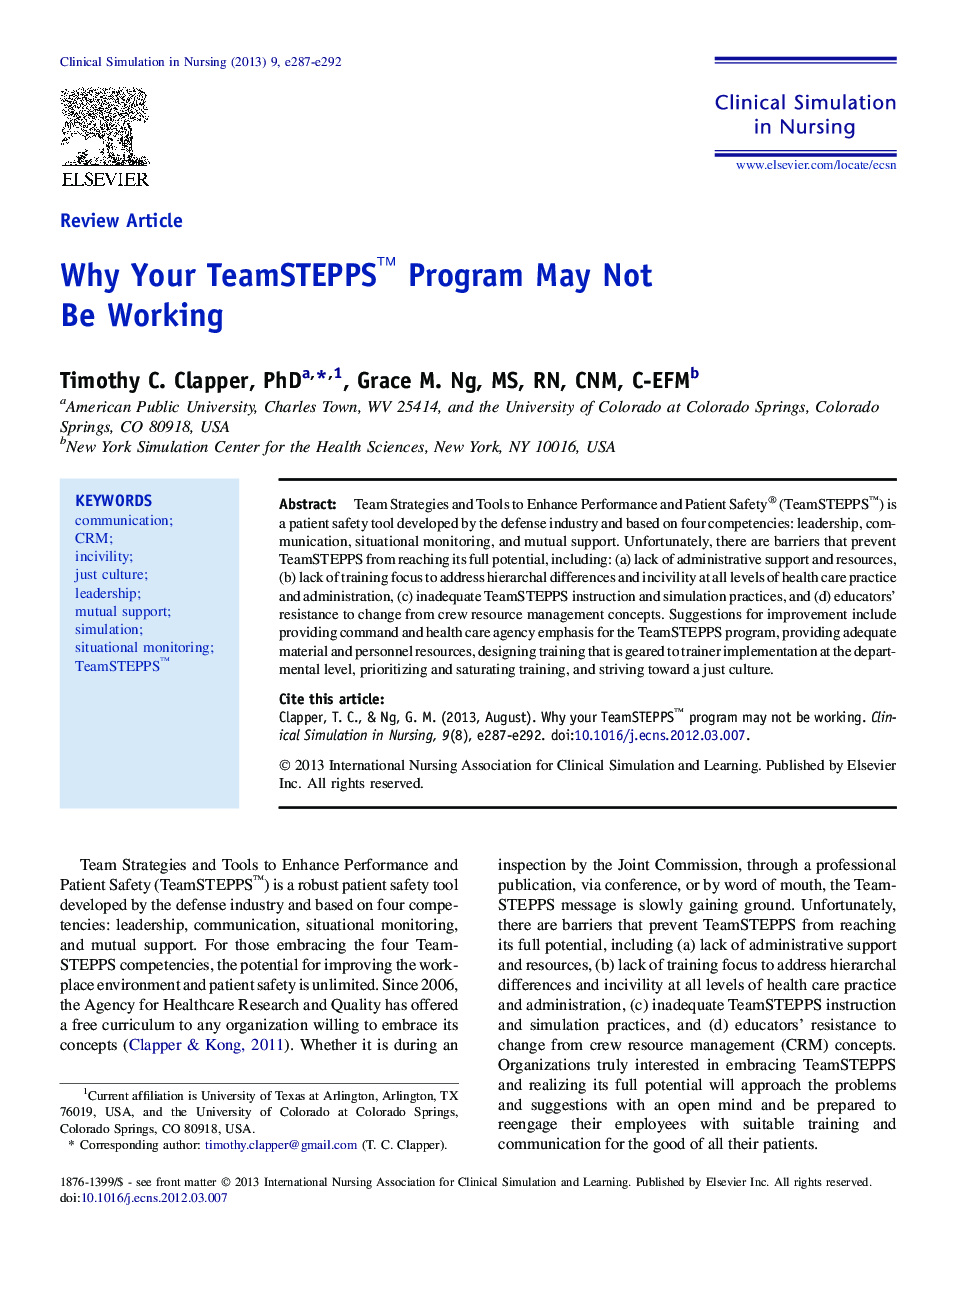 Why Your TeamSTEPPS™ Program May Not Be Working